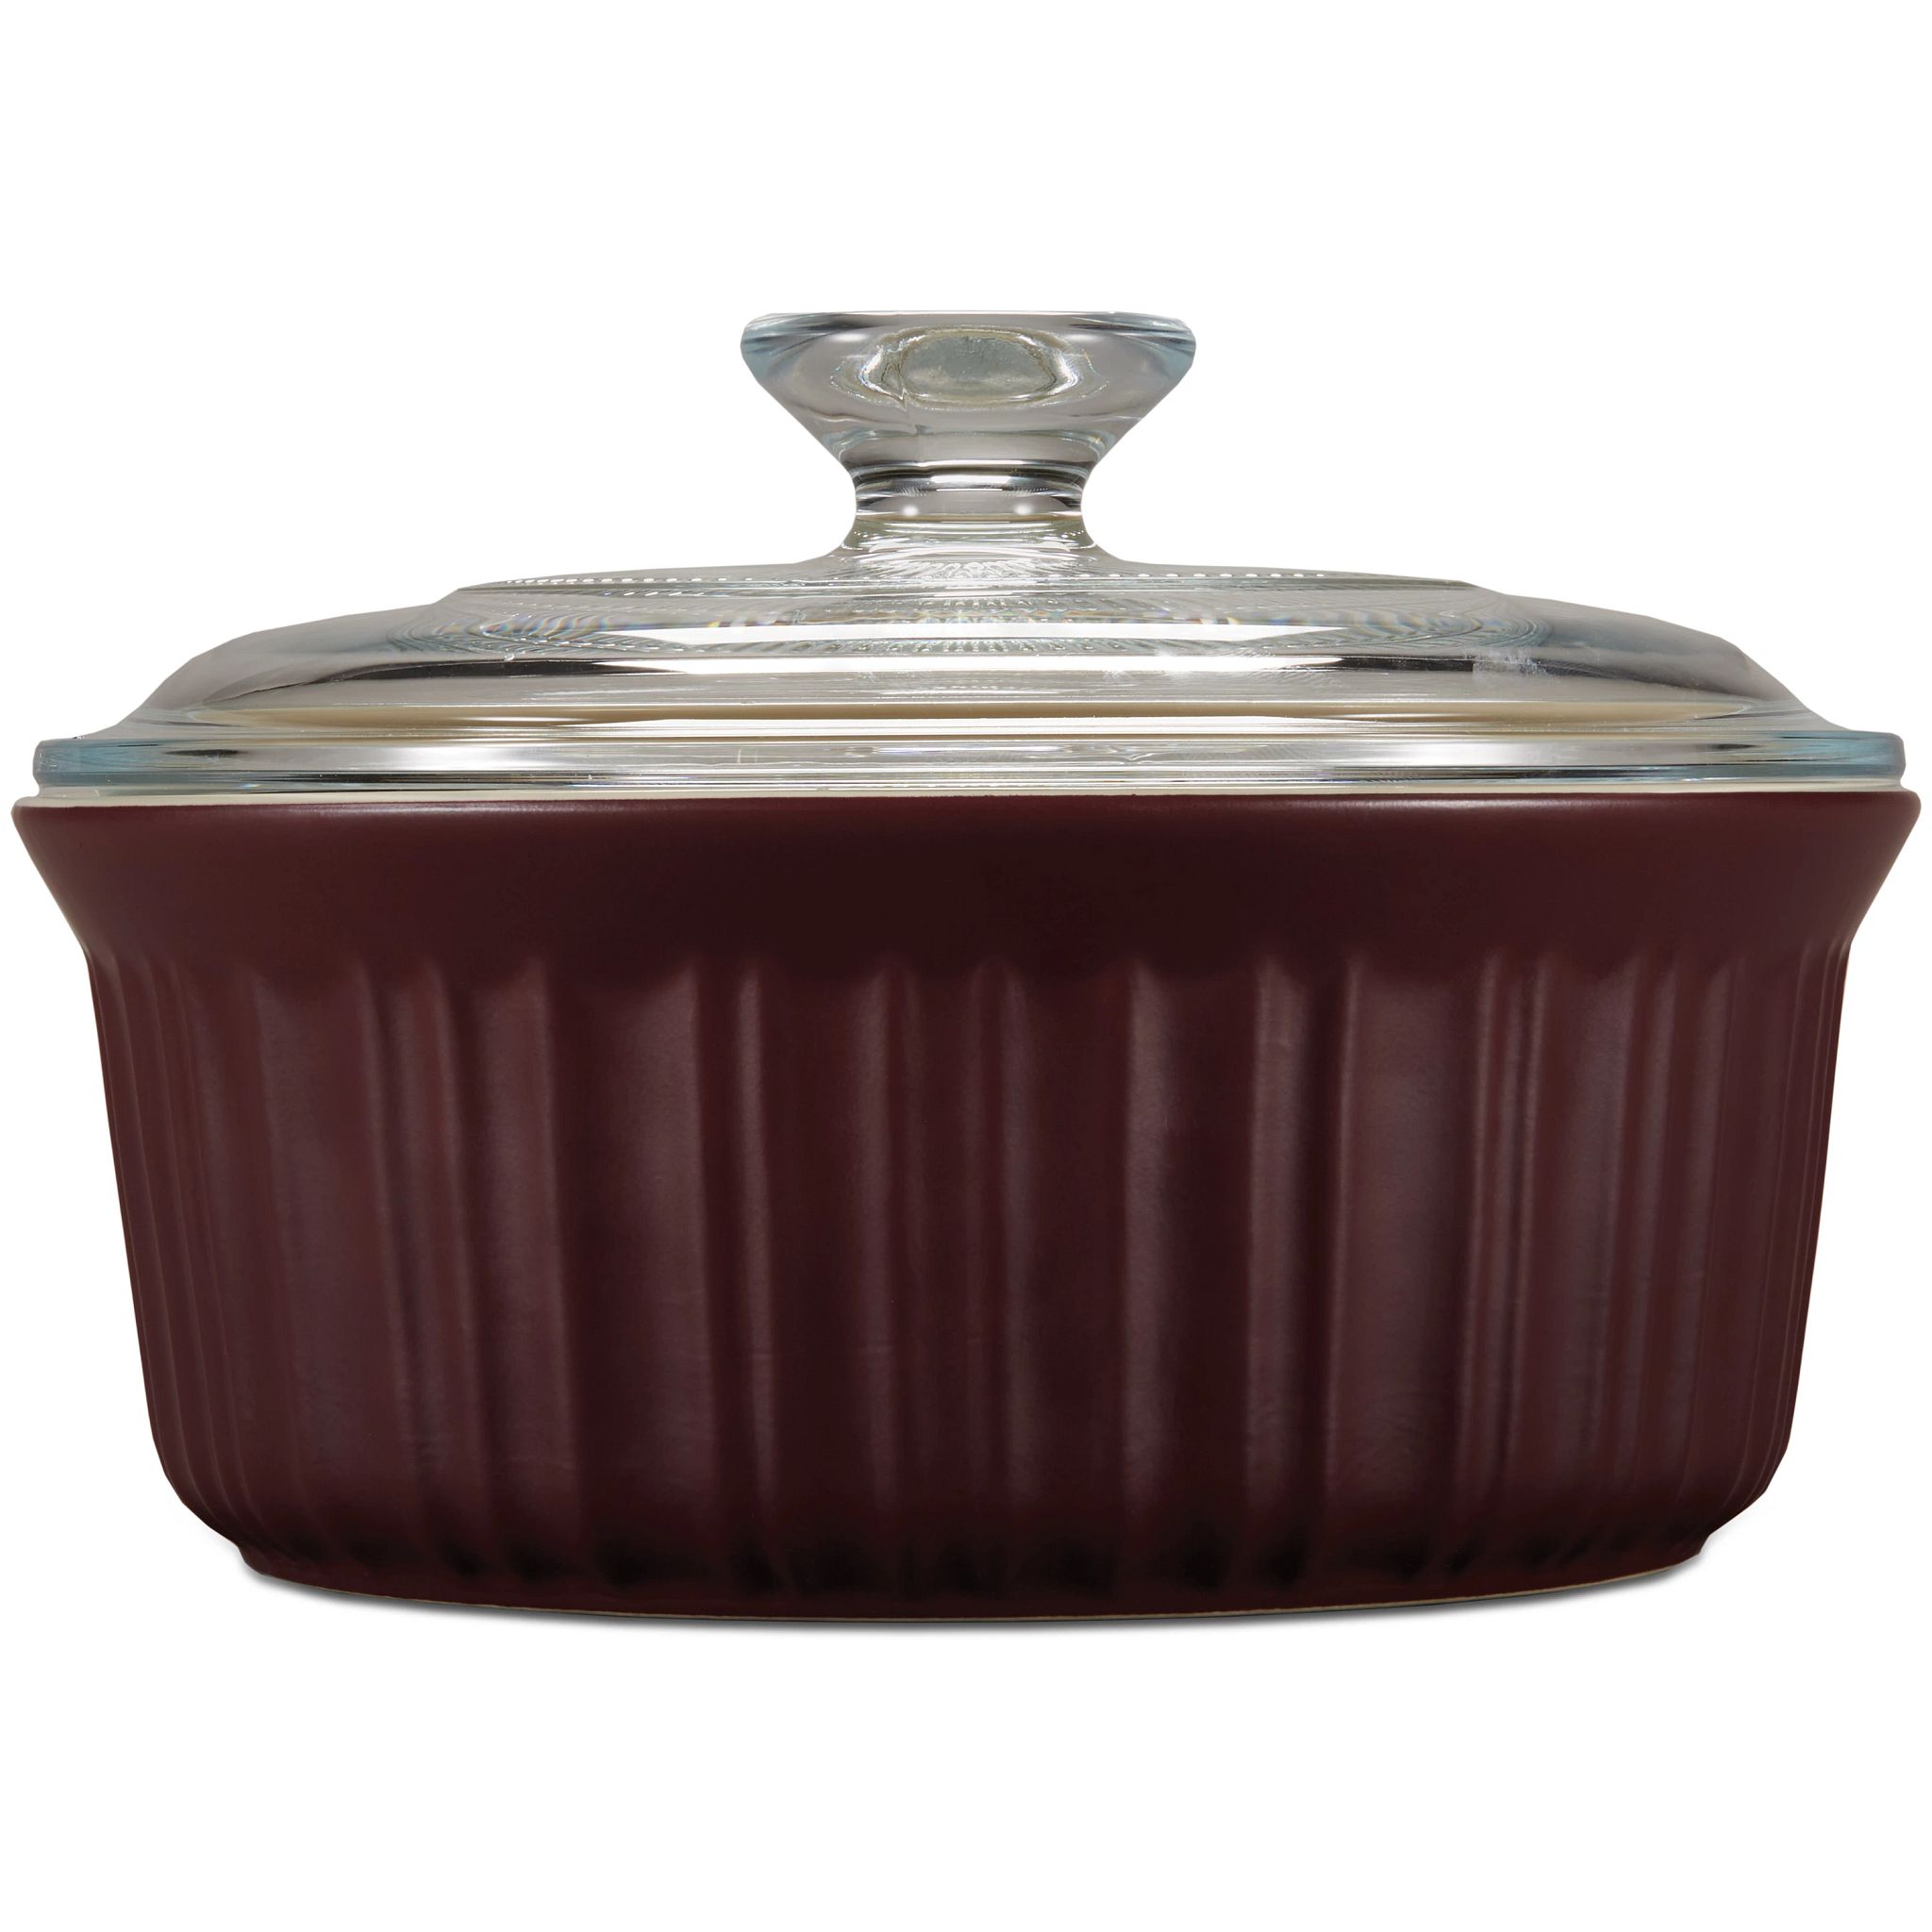 https://embed.widencdn.net/img/worldkitchen/qq6c8o5f0x/2048px/CW_1147244_French-Cabernet_1.5QT-Round-Bakeware-wLid_ATF_Square_Tile1.jpeg